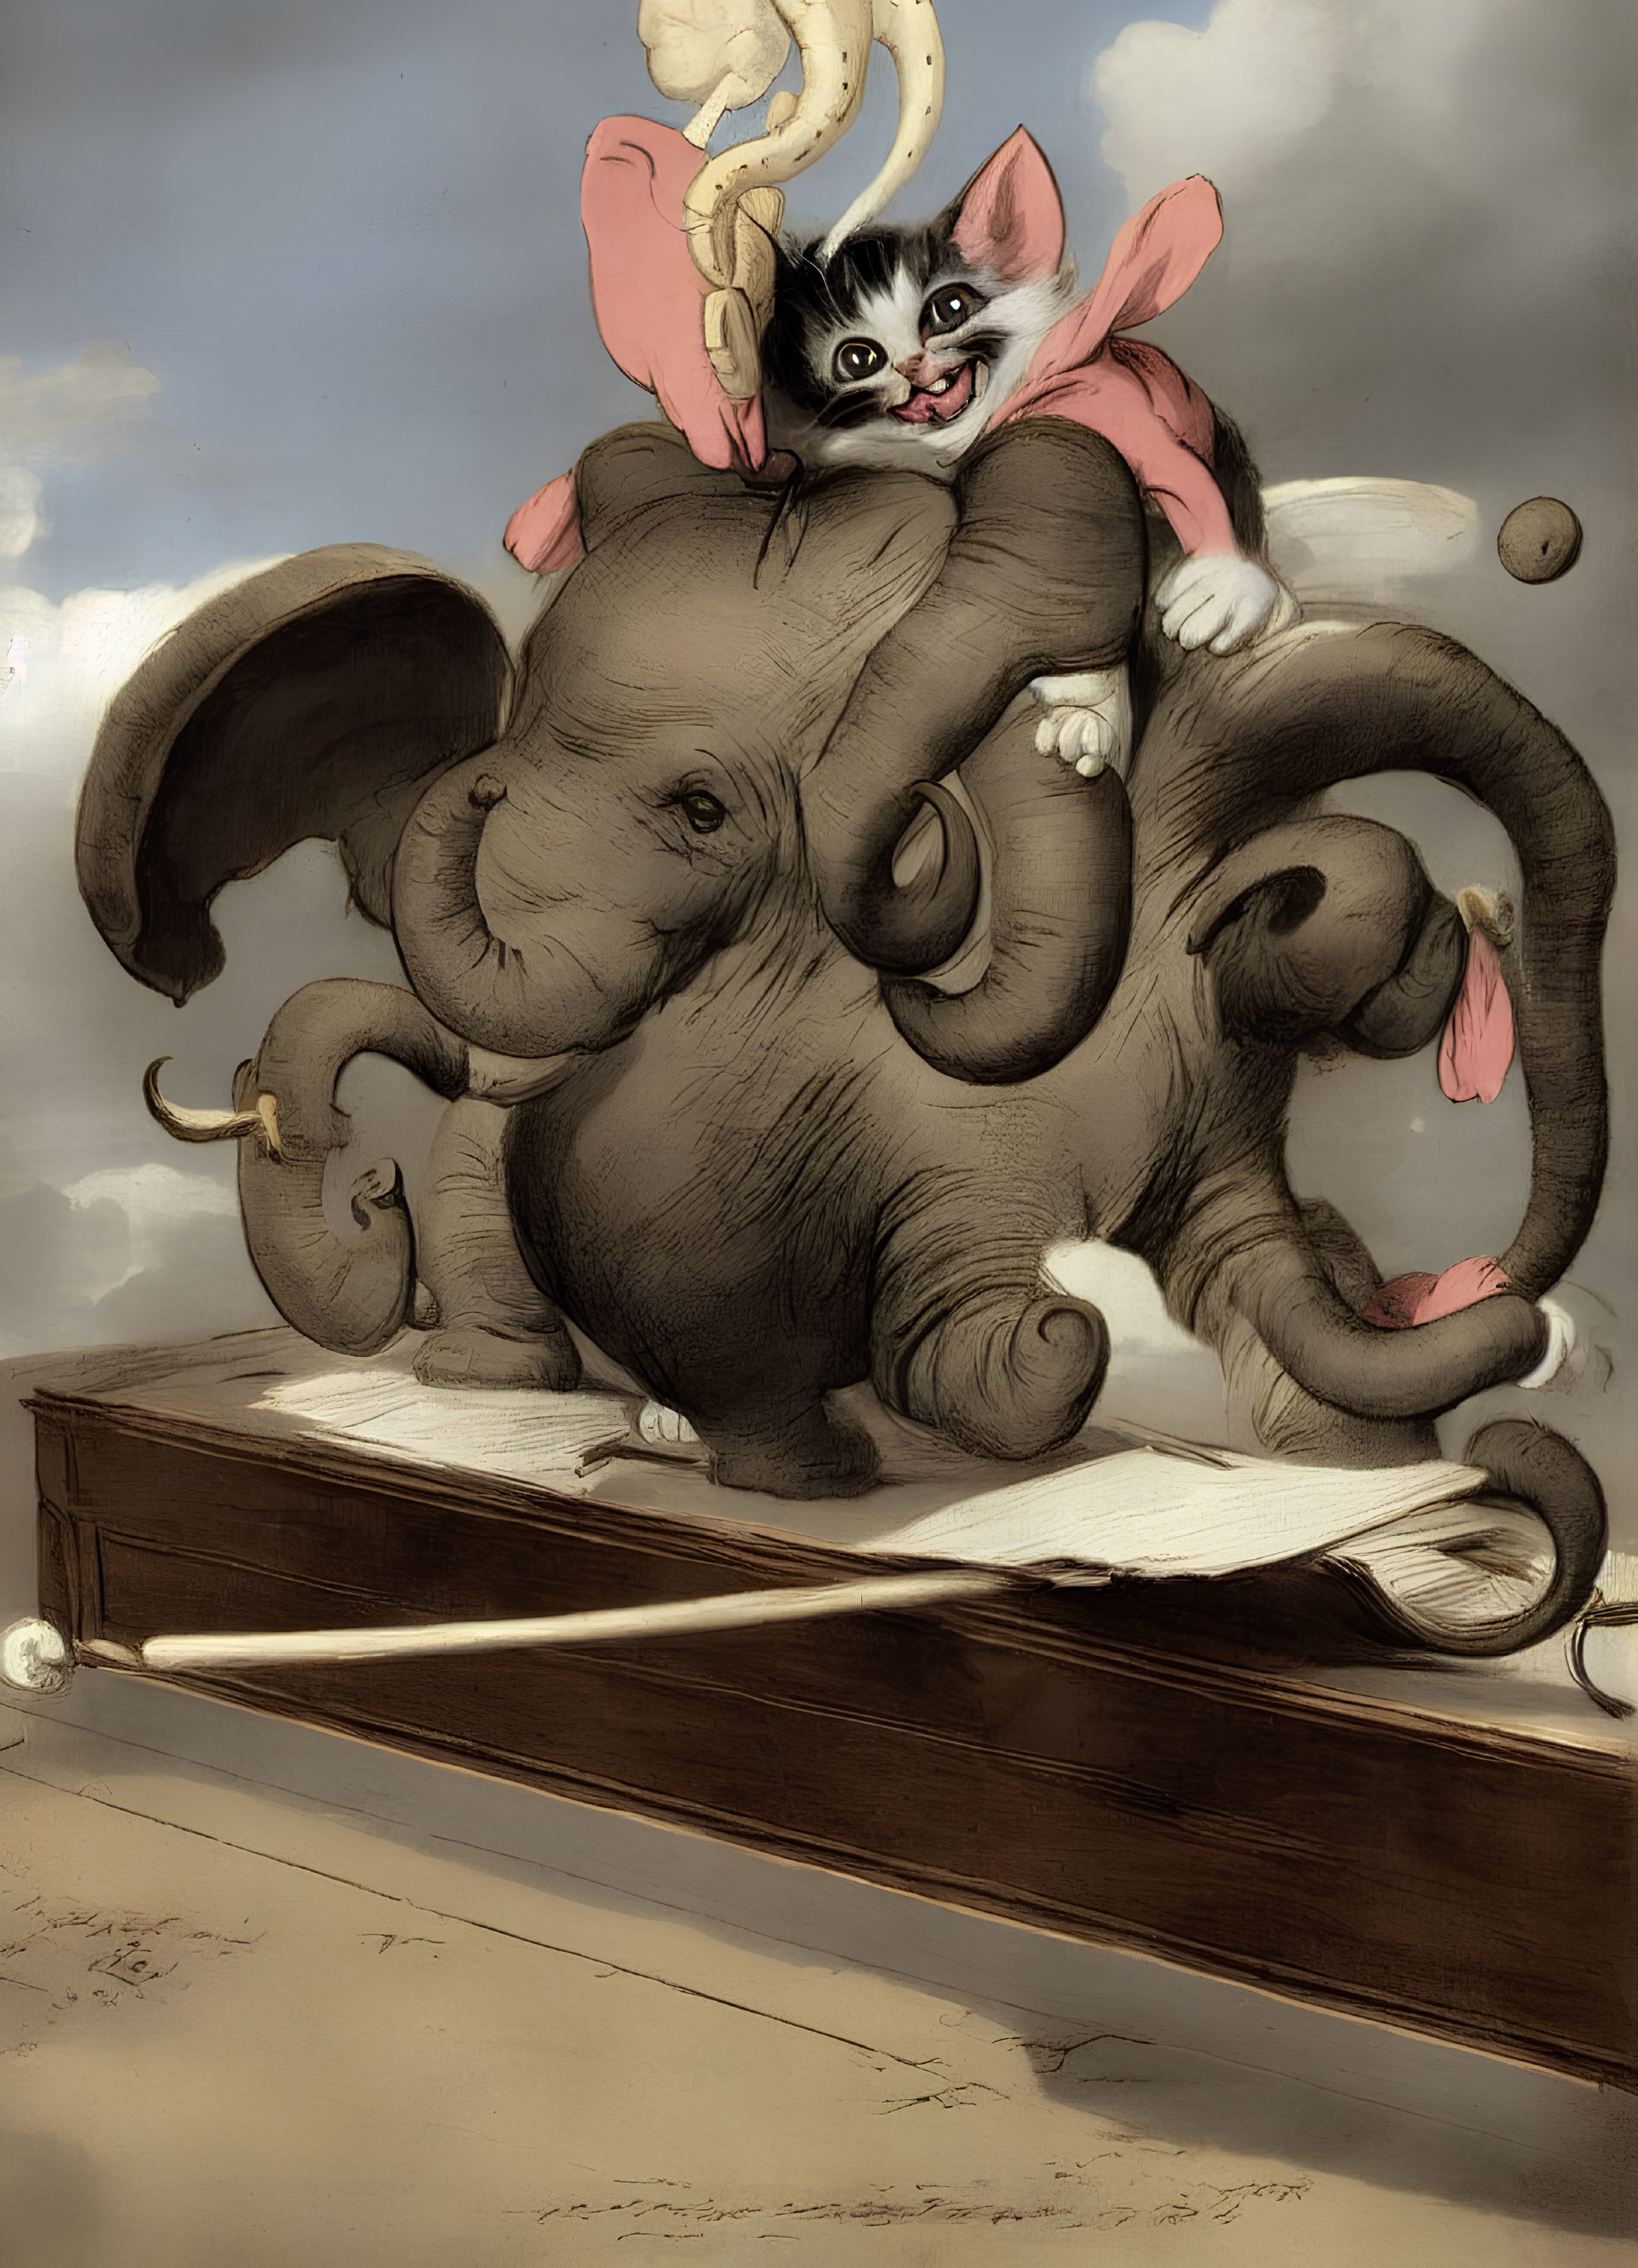 Whimsical illustration: Cat on balancing elephant in circus act